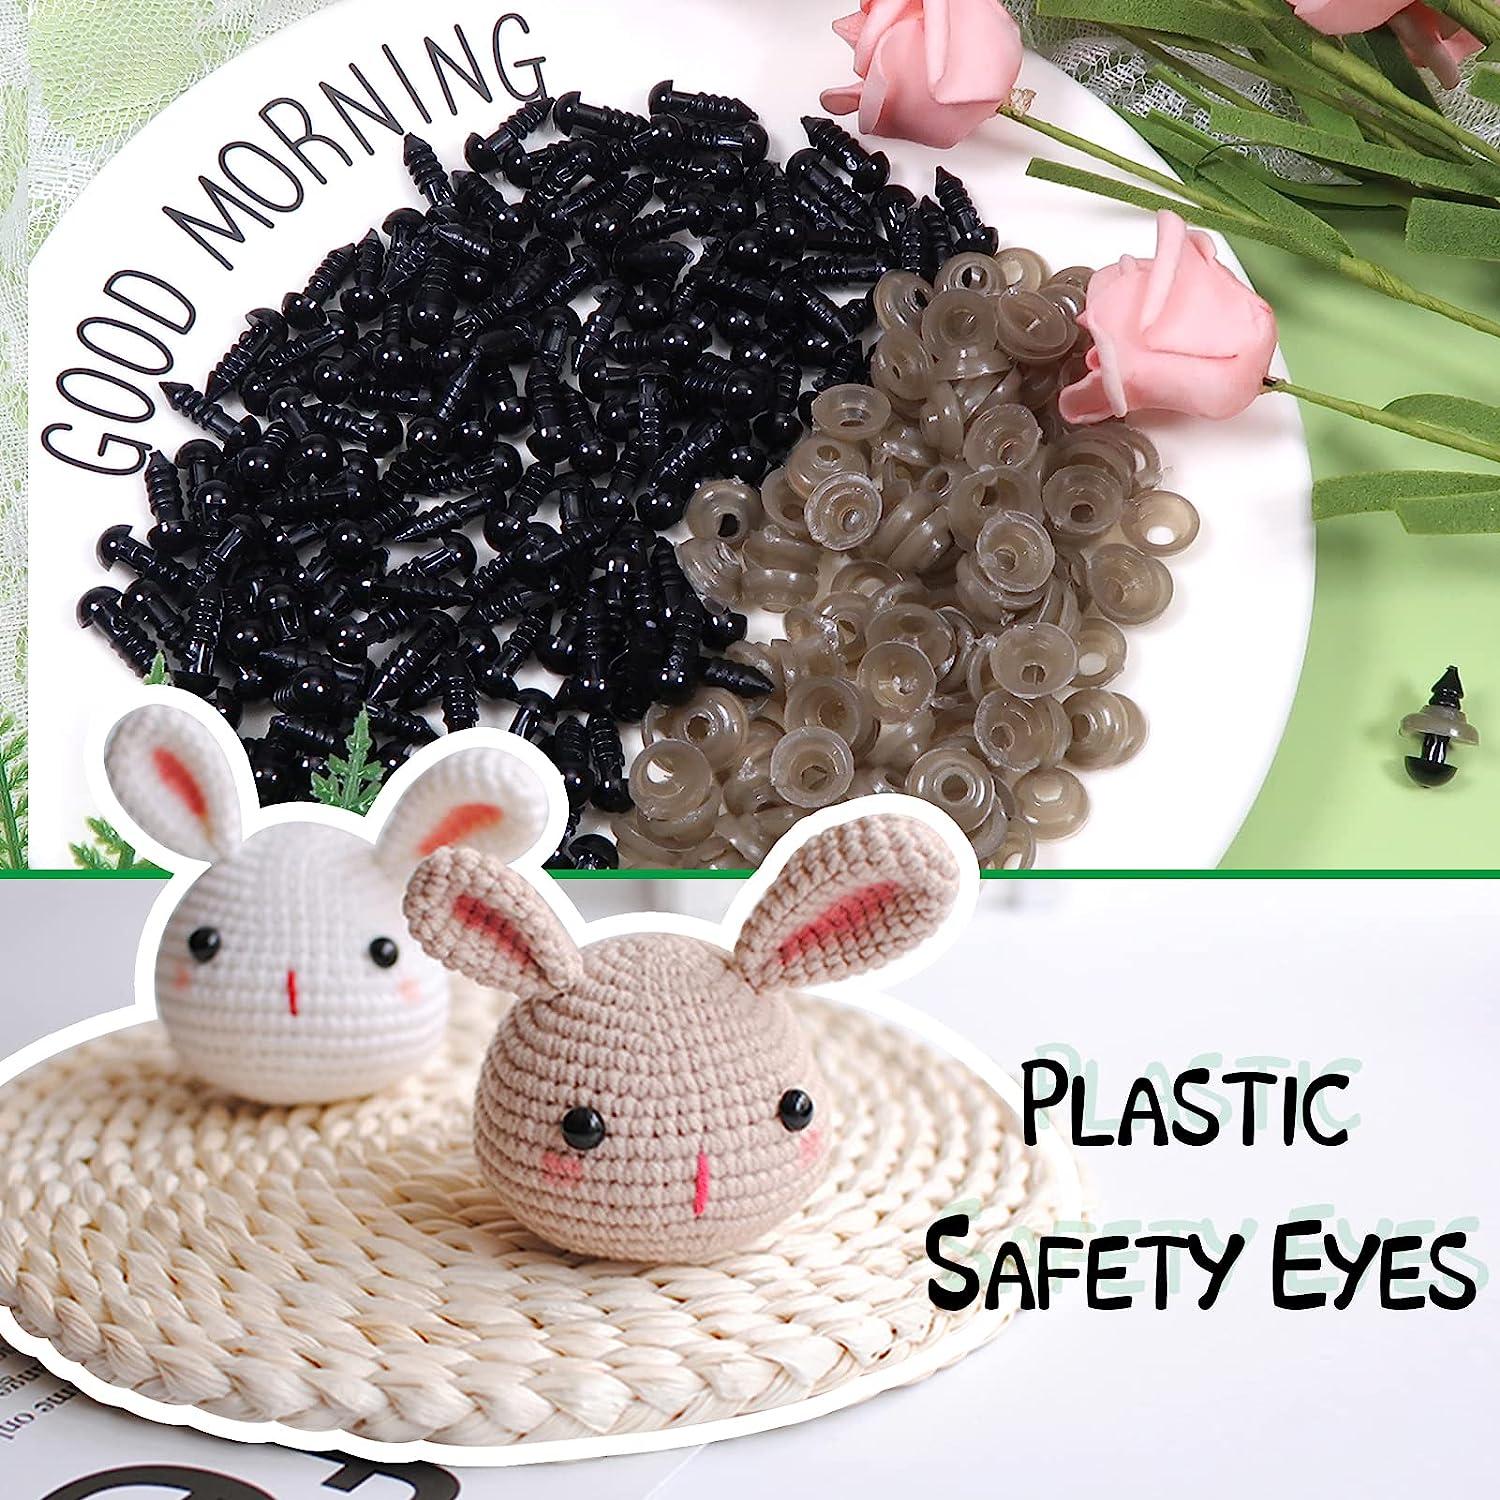  TOAOB 150pcs 6mm Black Plastic Safety Eyes Crafts Safety Eyes  with Washers for Stuffed Animals Amigurumis Crochet Bears Doll Making